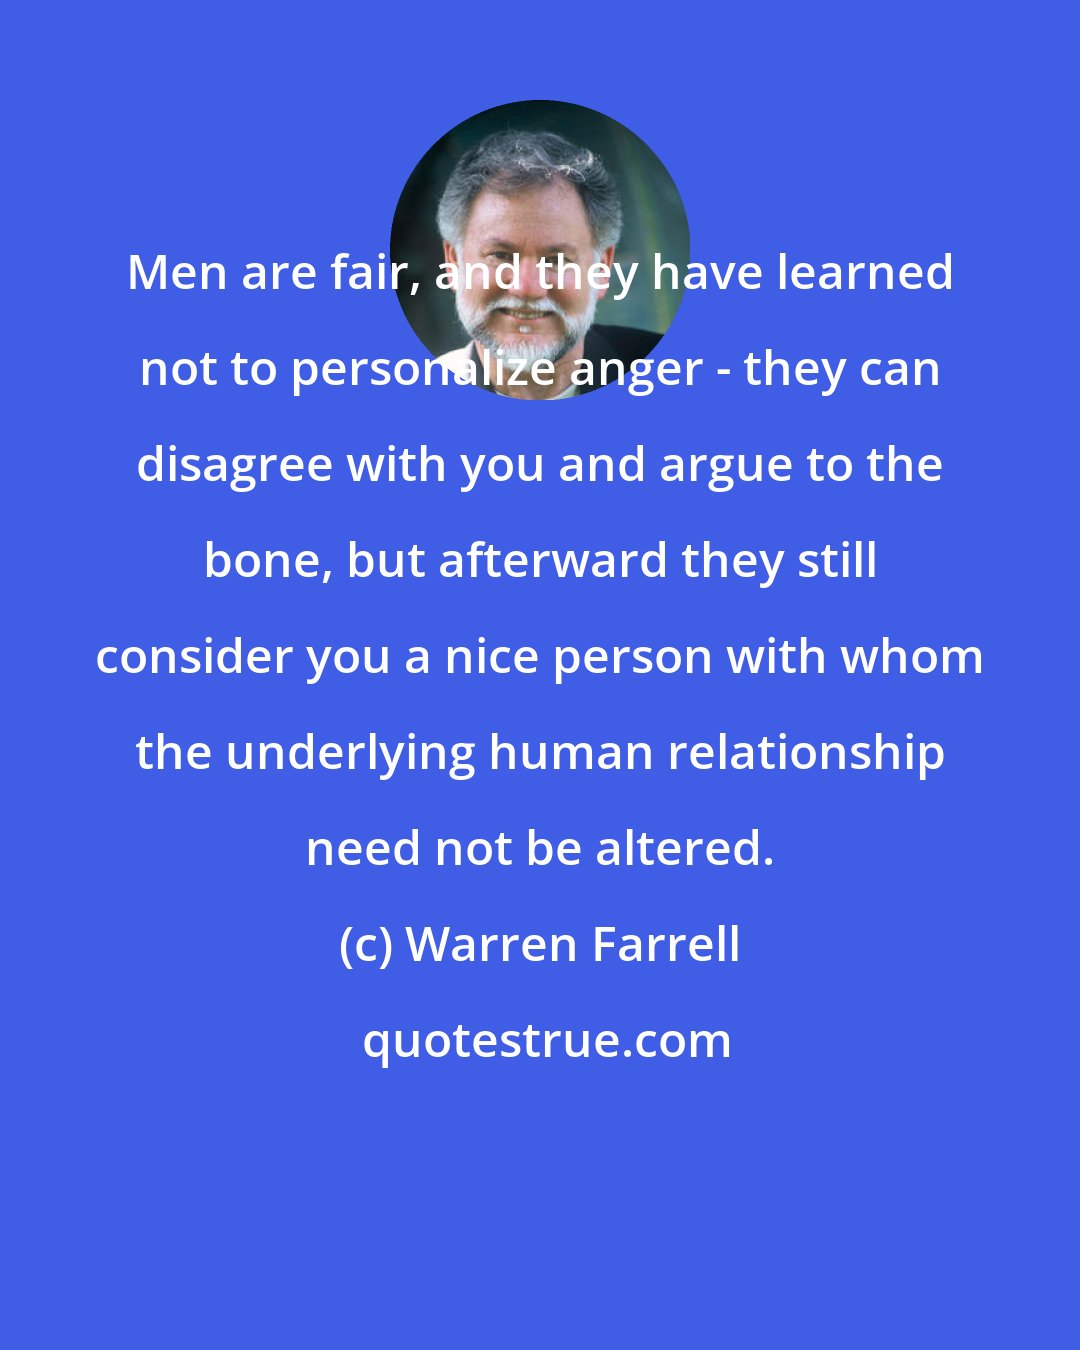 Warren Farrell: Men are fair, and they have learned not to personalize anger - they can disagree with you and argue to the bone, but afterward they still consider you a nice person with whom the underlying human relationship need not be altered.